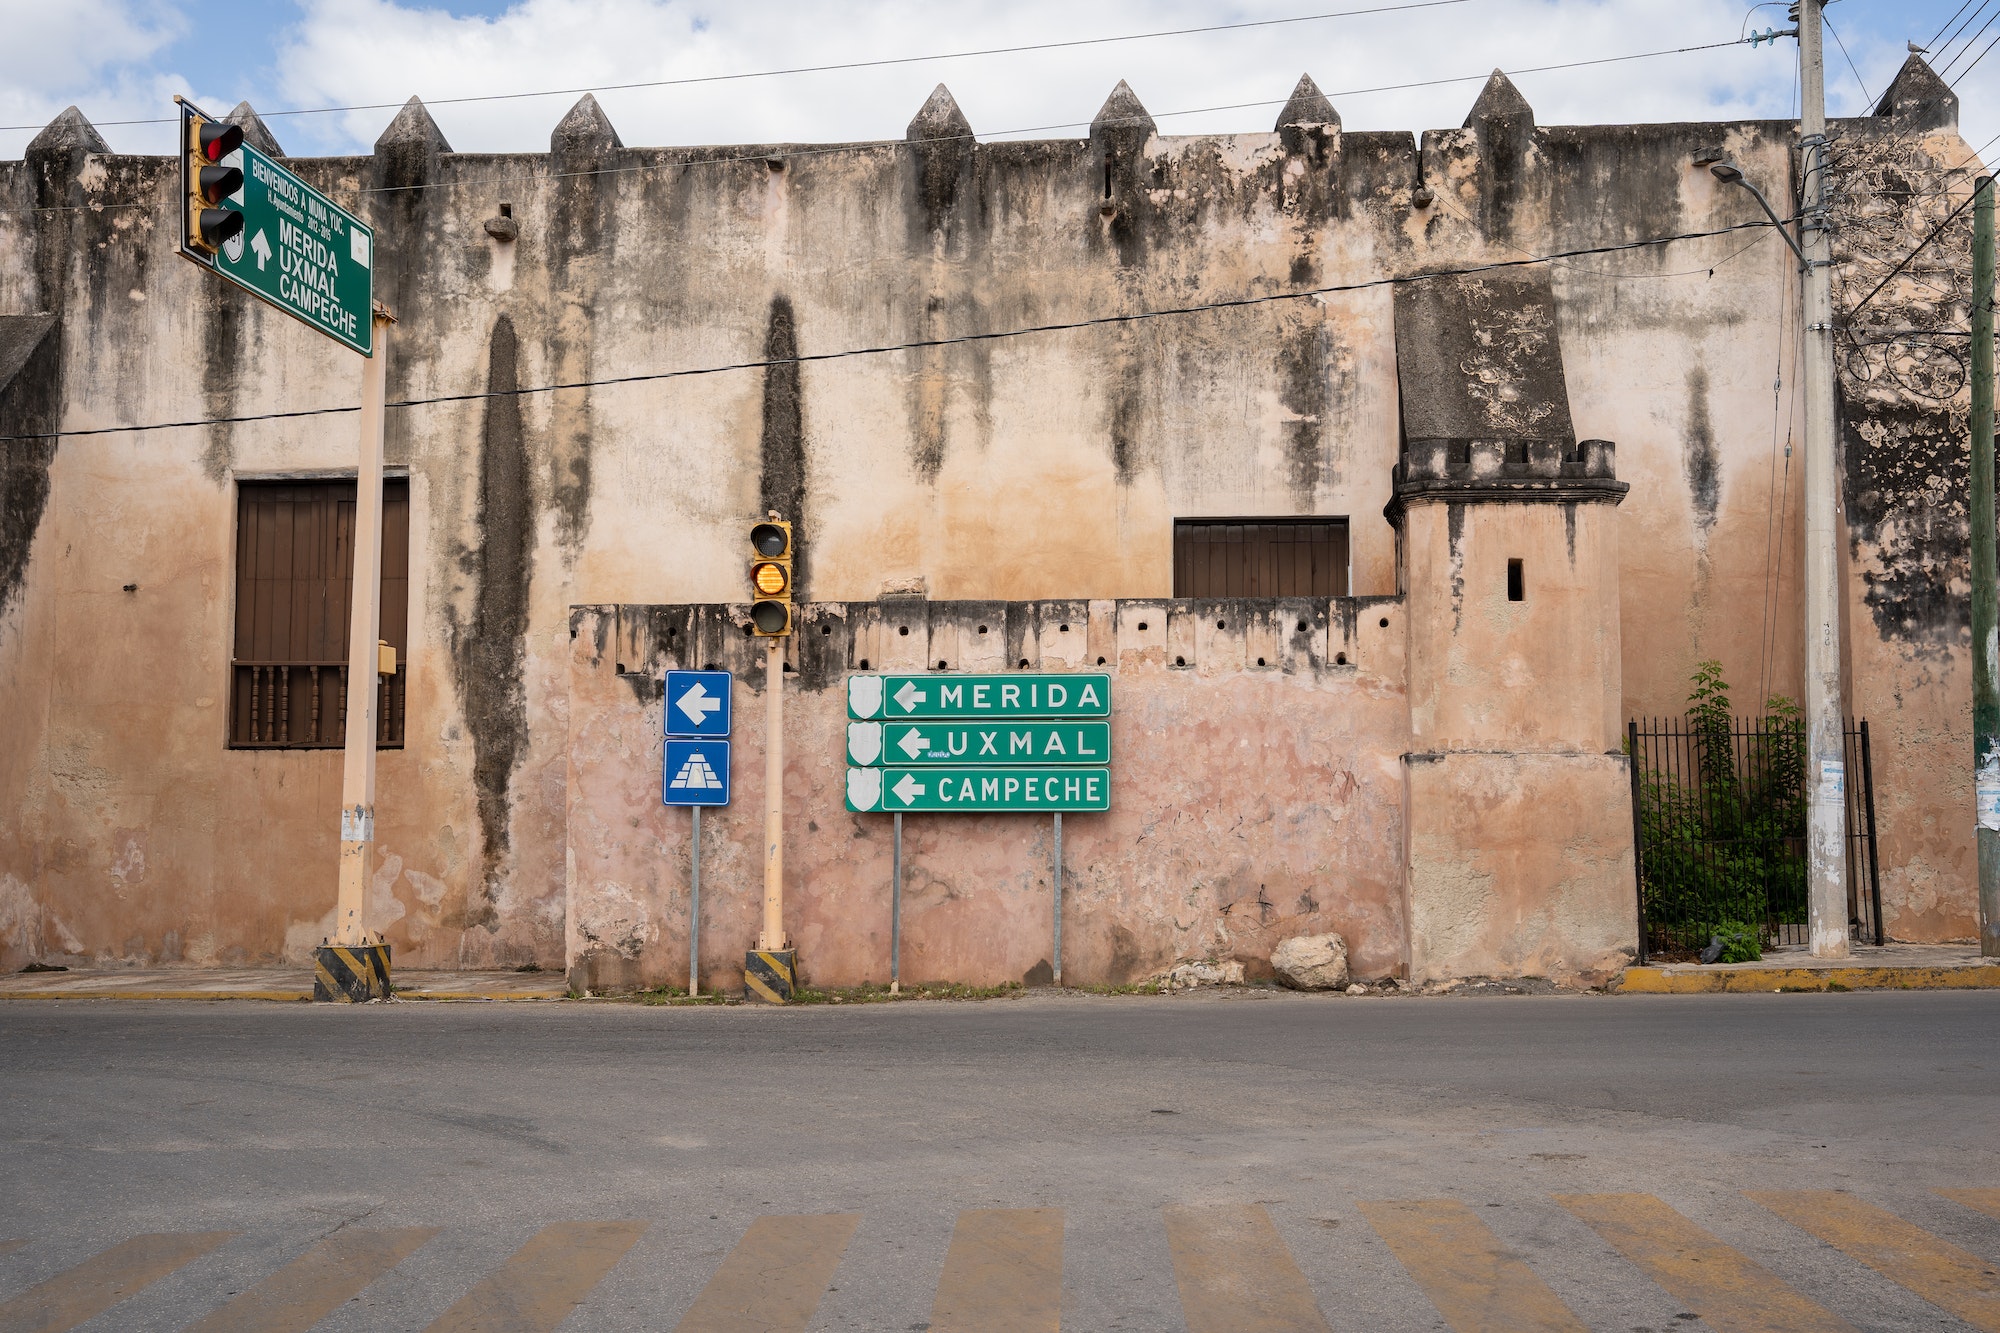 Signposts in Mexico in the direction of Merida, Uxmal, Campeche